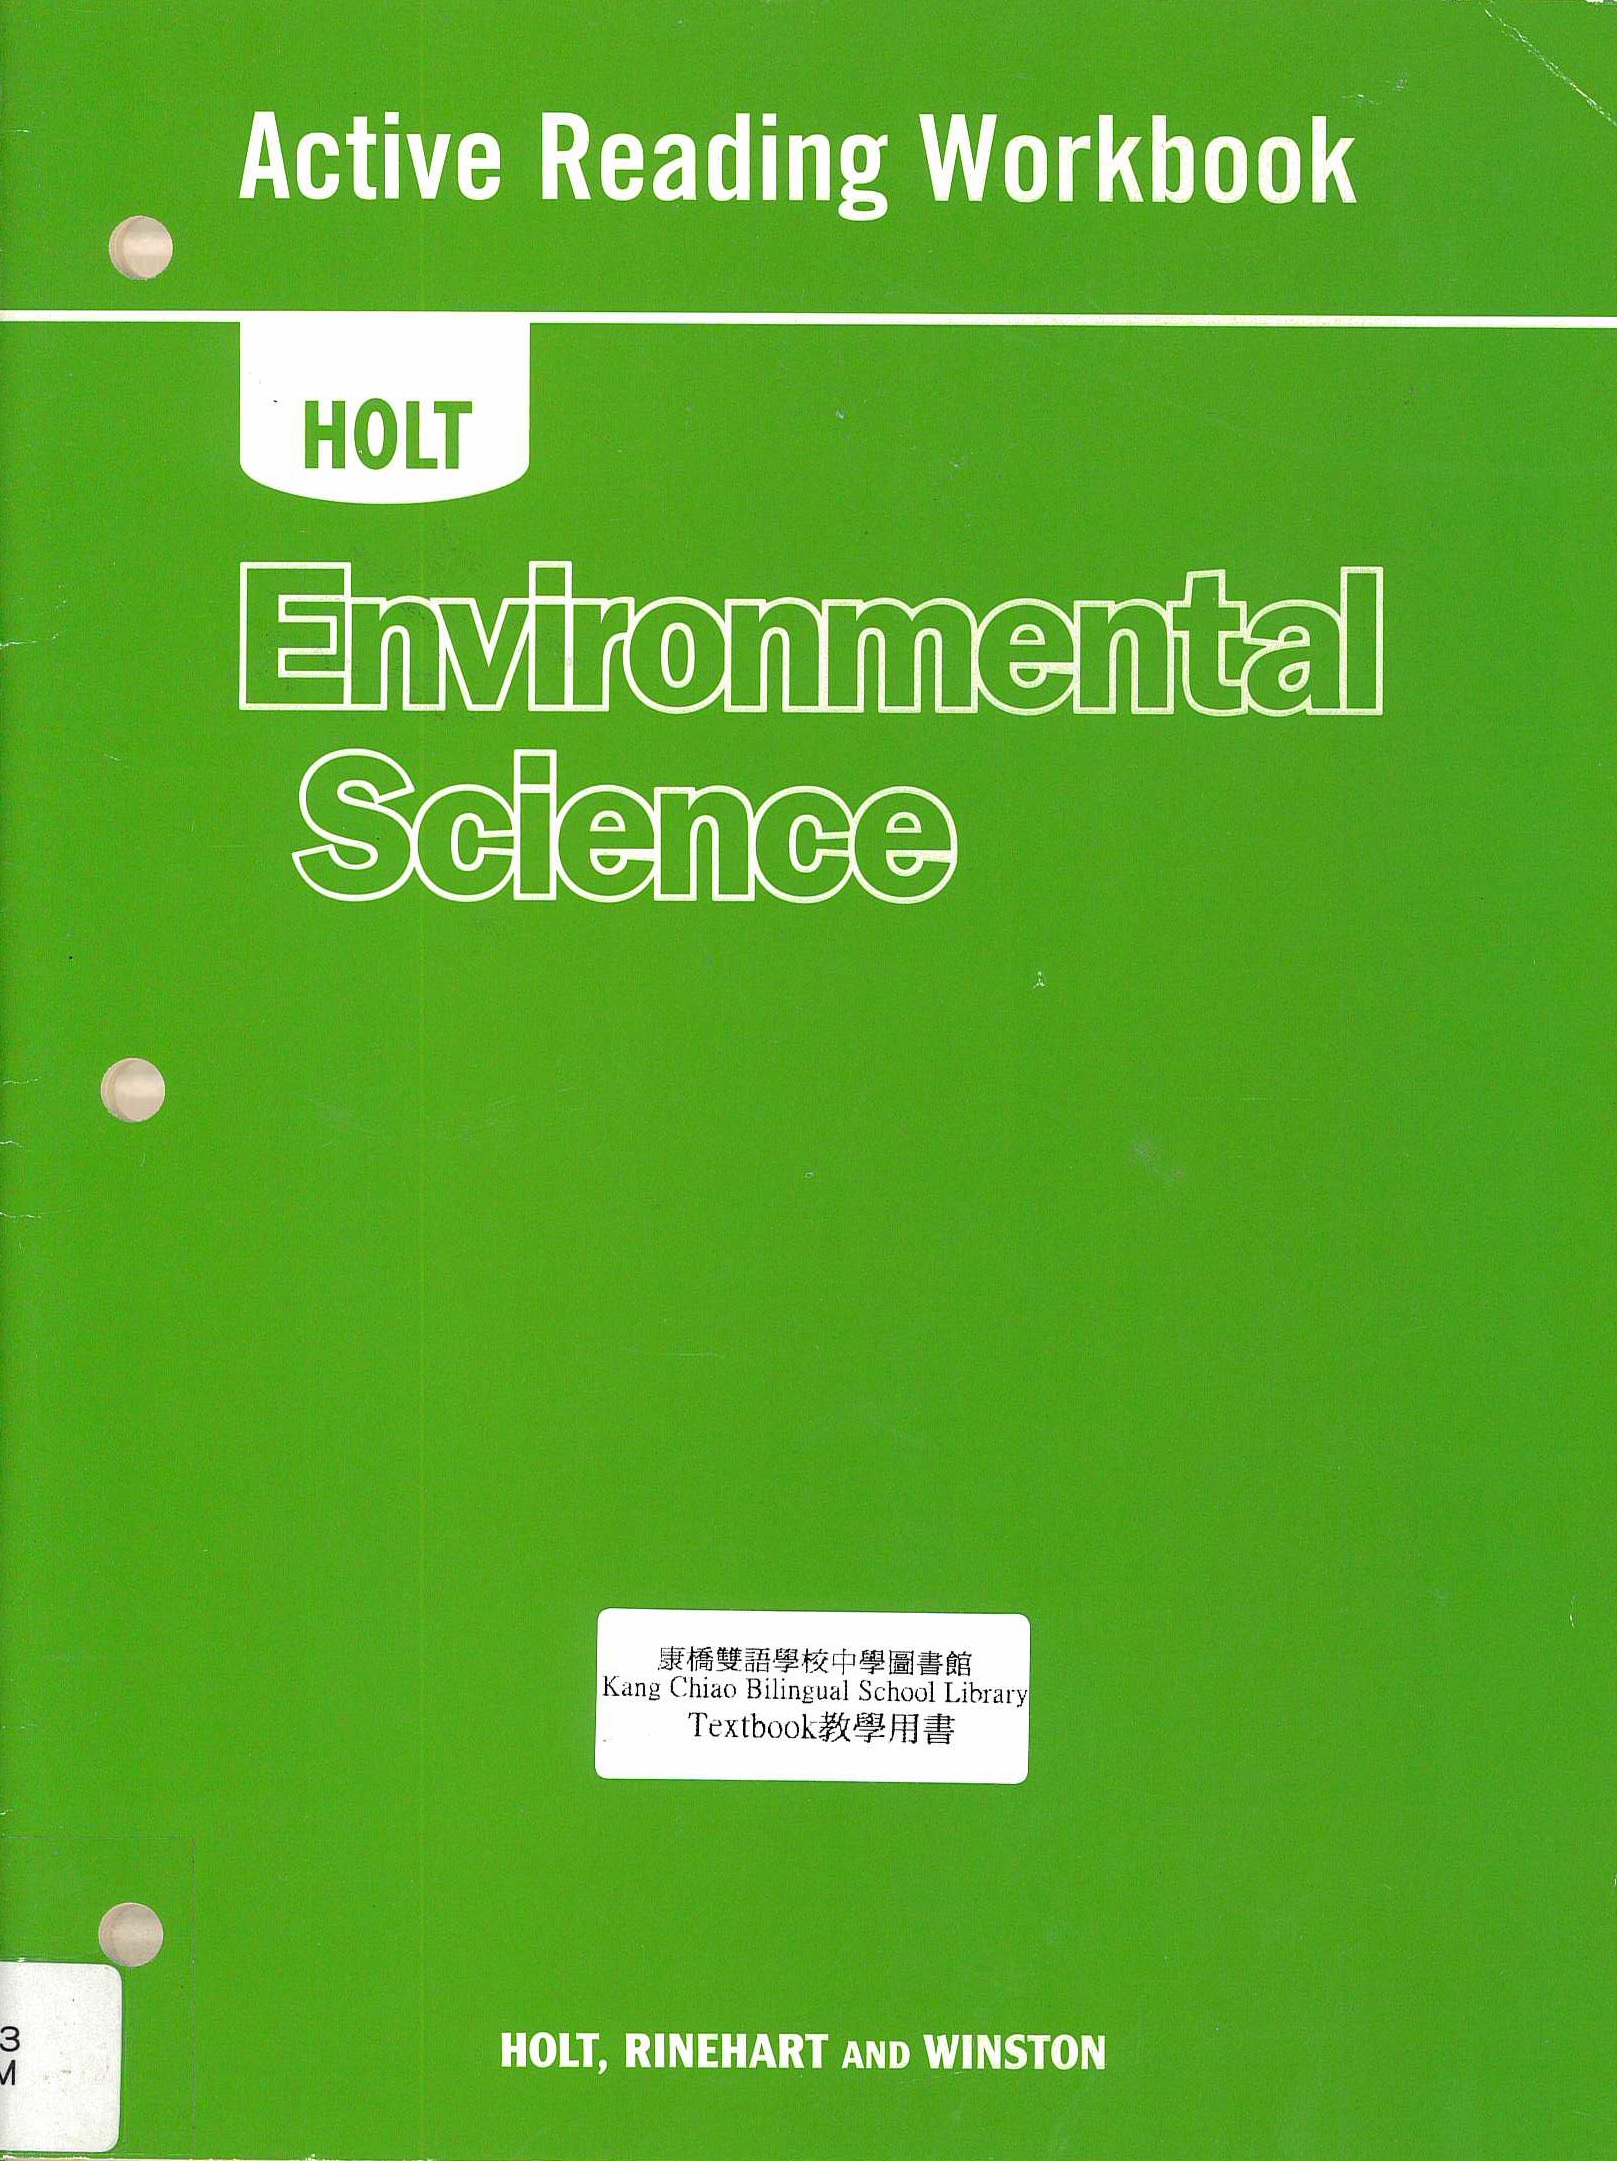 Holt environmental science : active reading workbook